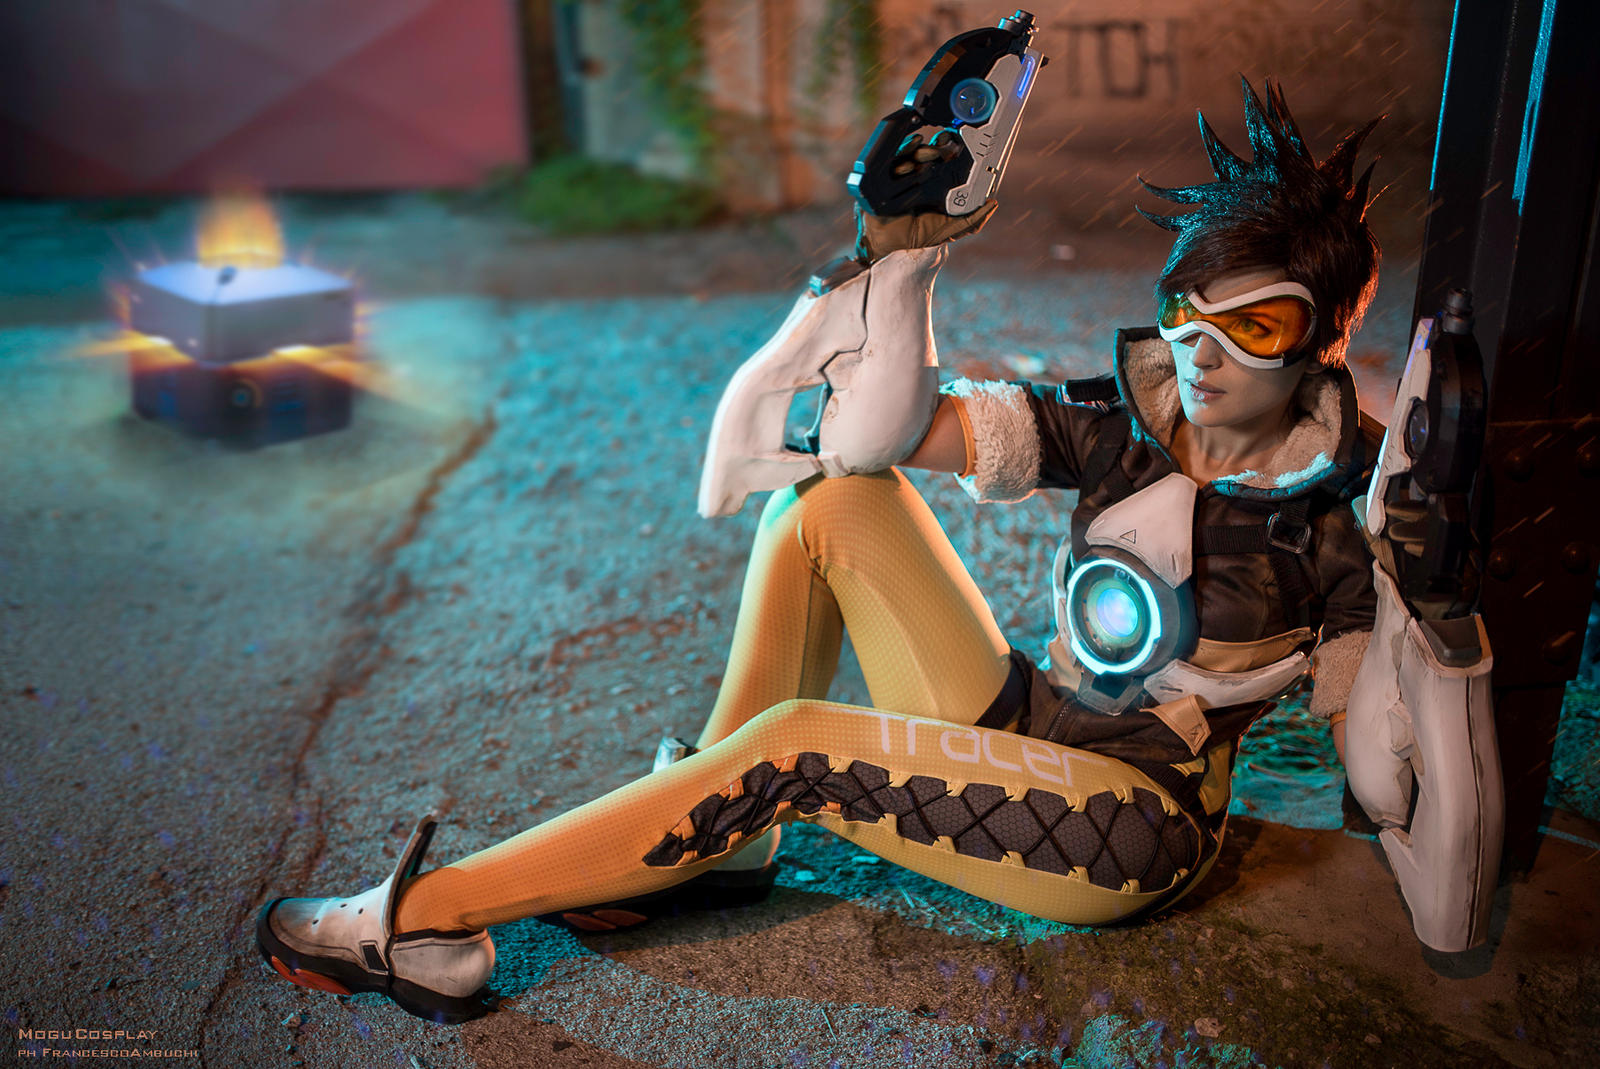 Cavalry is here! - Tracer from Overwatch